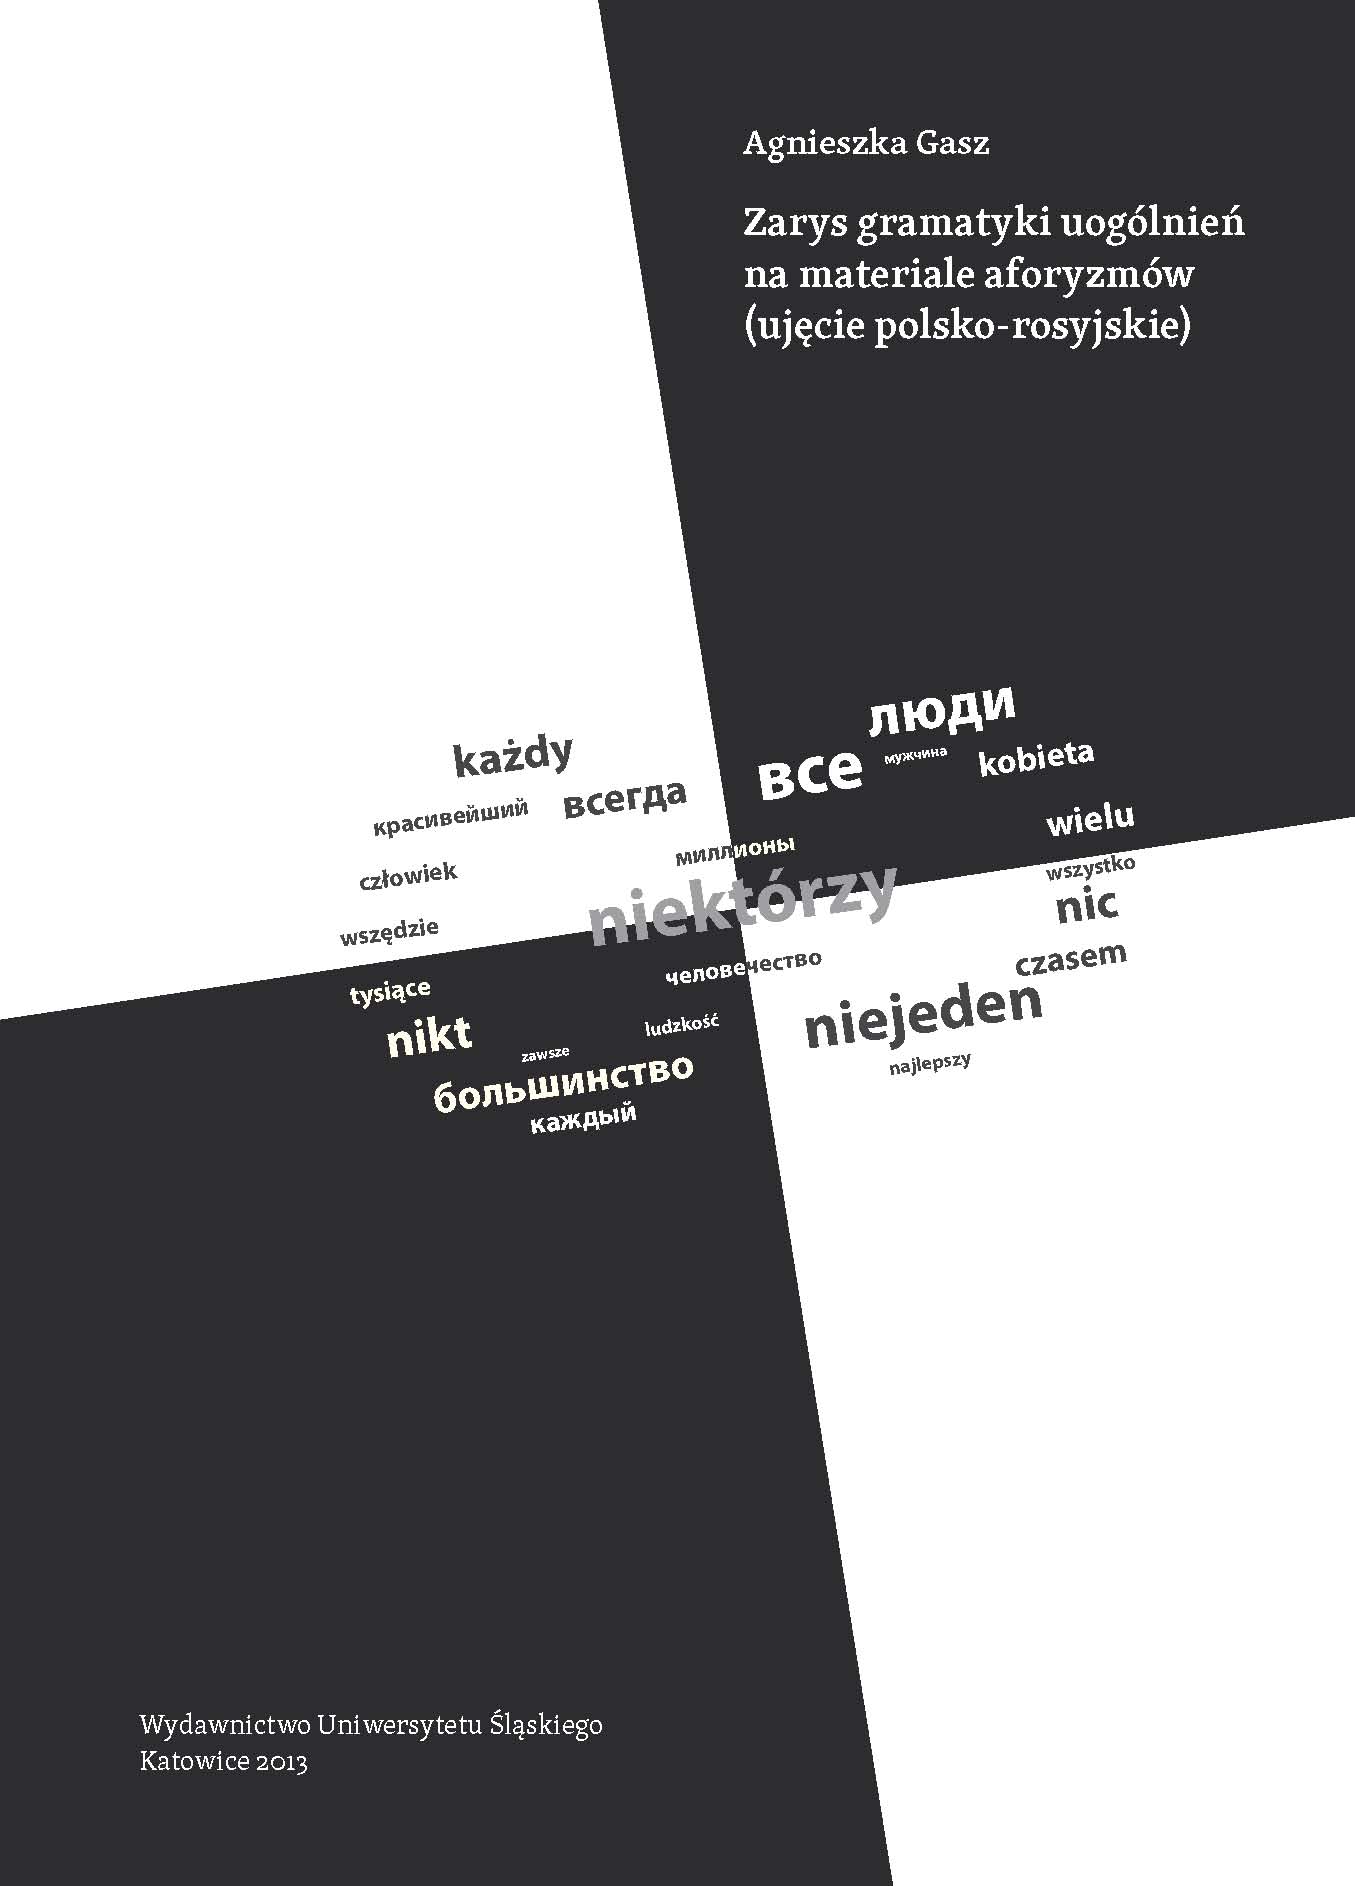 An outline of generalization grammar on the basis of aphorisms (a Polish-Russian perspective)